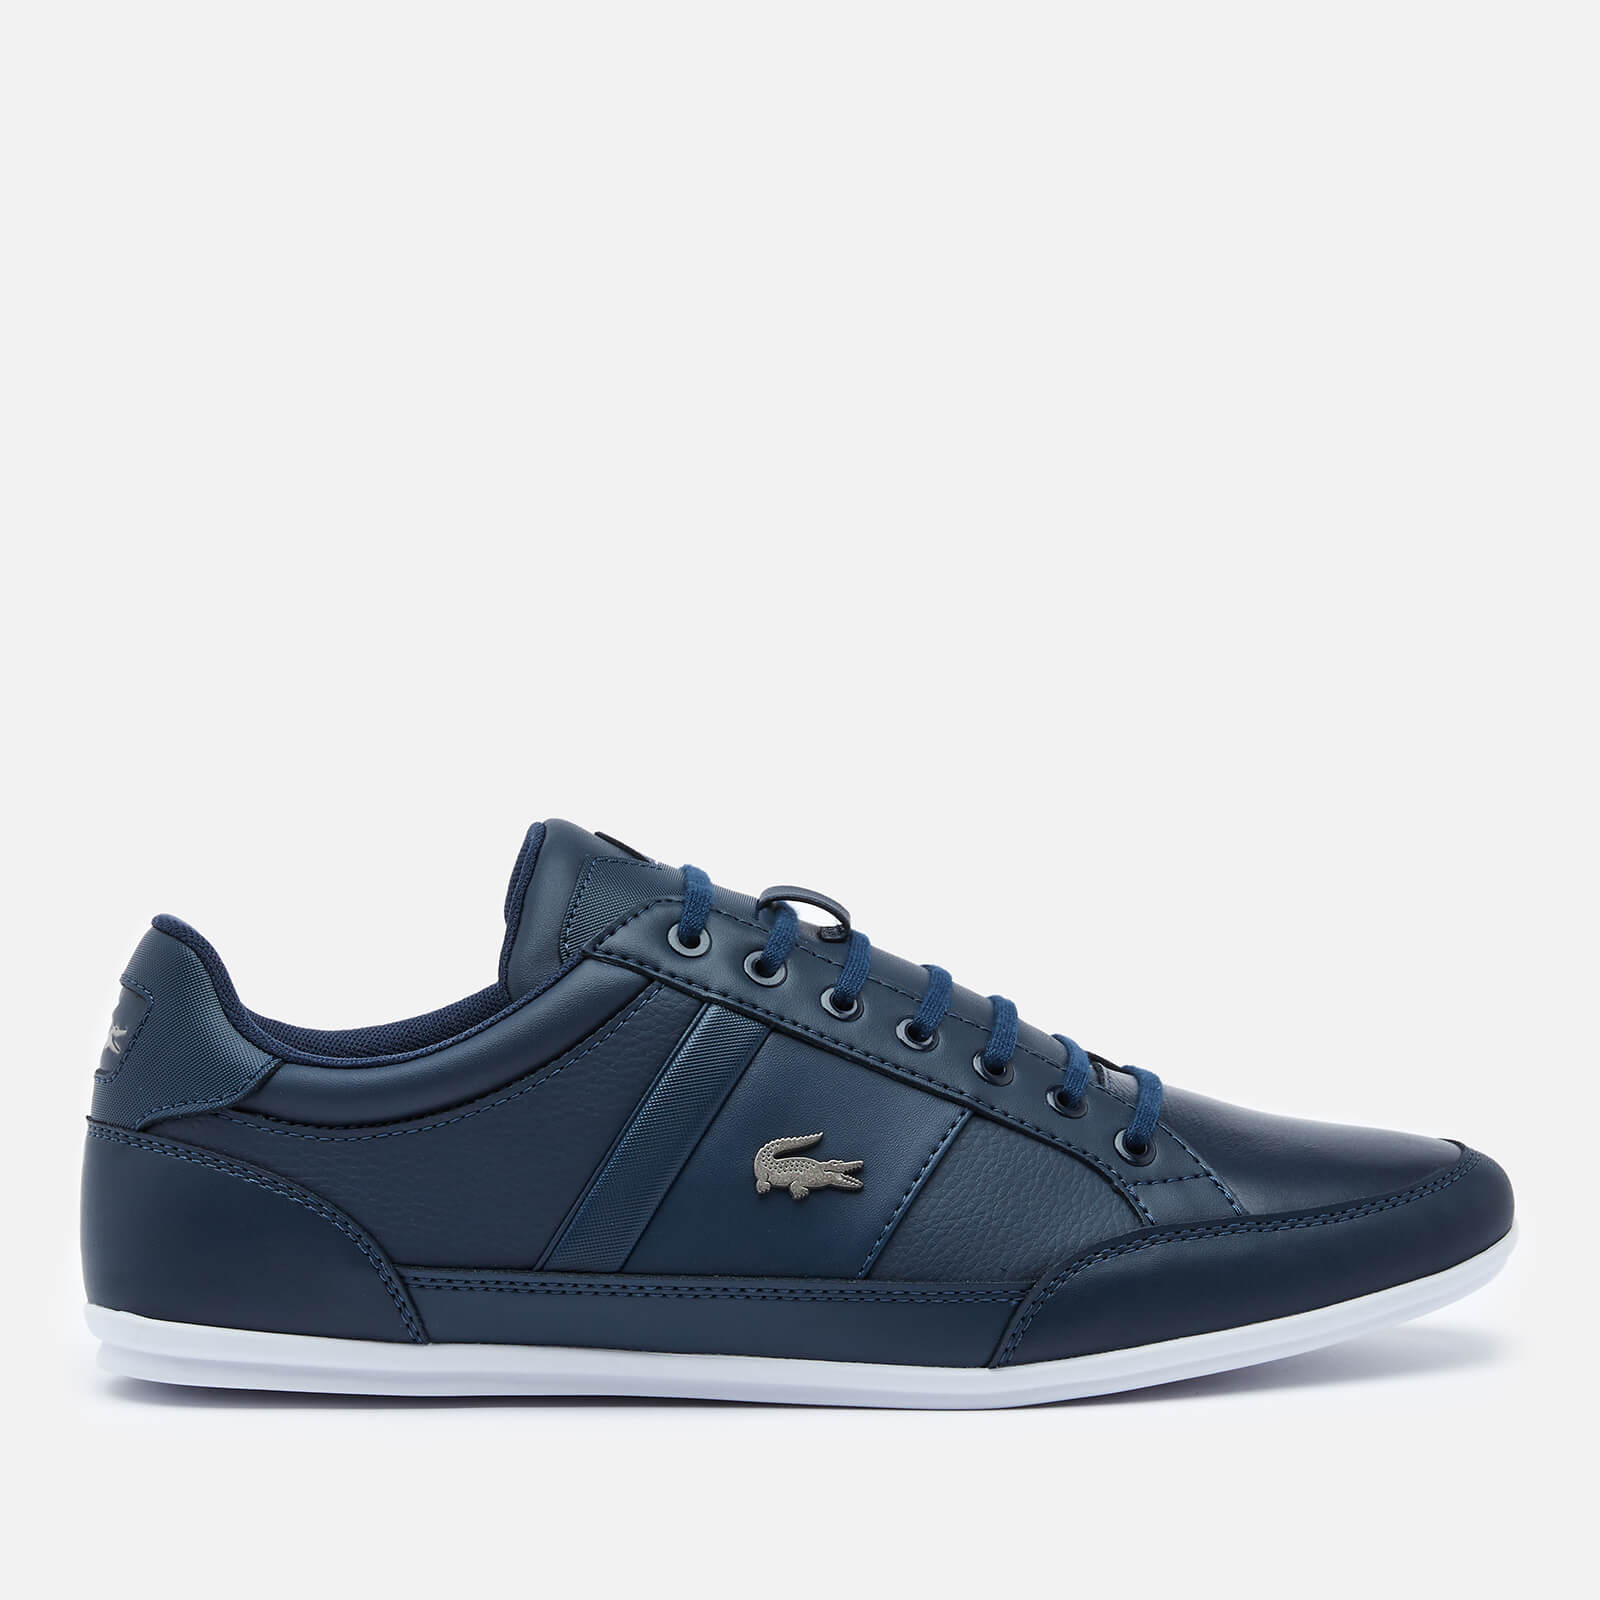 Lacoste Men's Chaymon Bl 1 Leather Low Profile Trainers - Navy/White ...